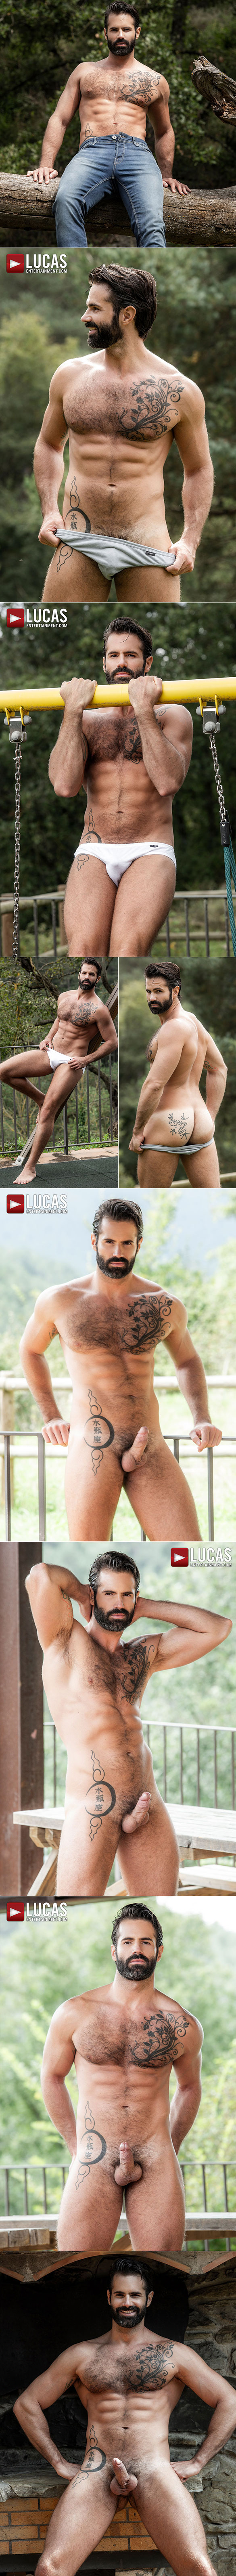 Lucas Entertainment: Tomas Brand fucks Dani Robles bareback in "Uncut in the Great Outdoors"